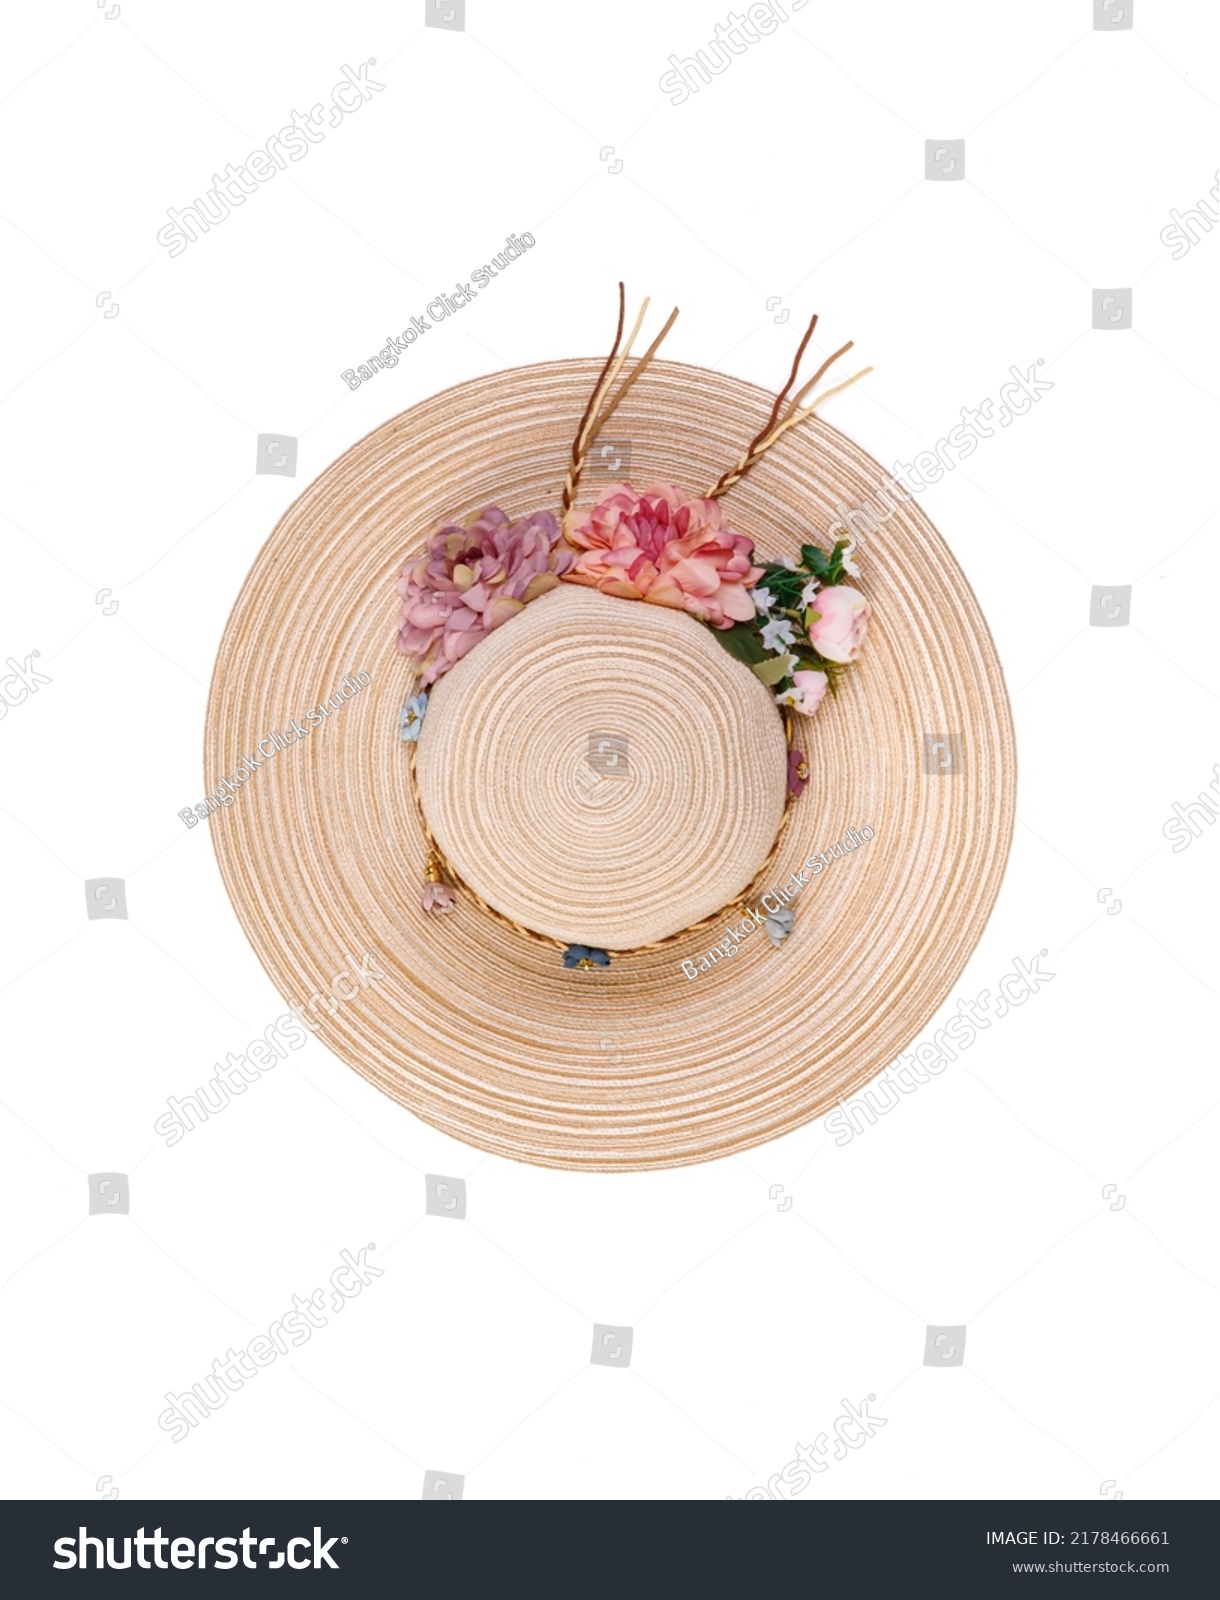 Closeup studio top view isolated shot of beautiful fashionable Asian modern classic style lady woman wicker woven weaving rattan handmade handicraft hat with dry flowers hatband on white background. #2178466661